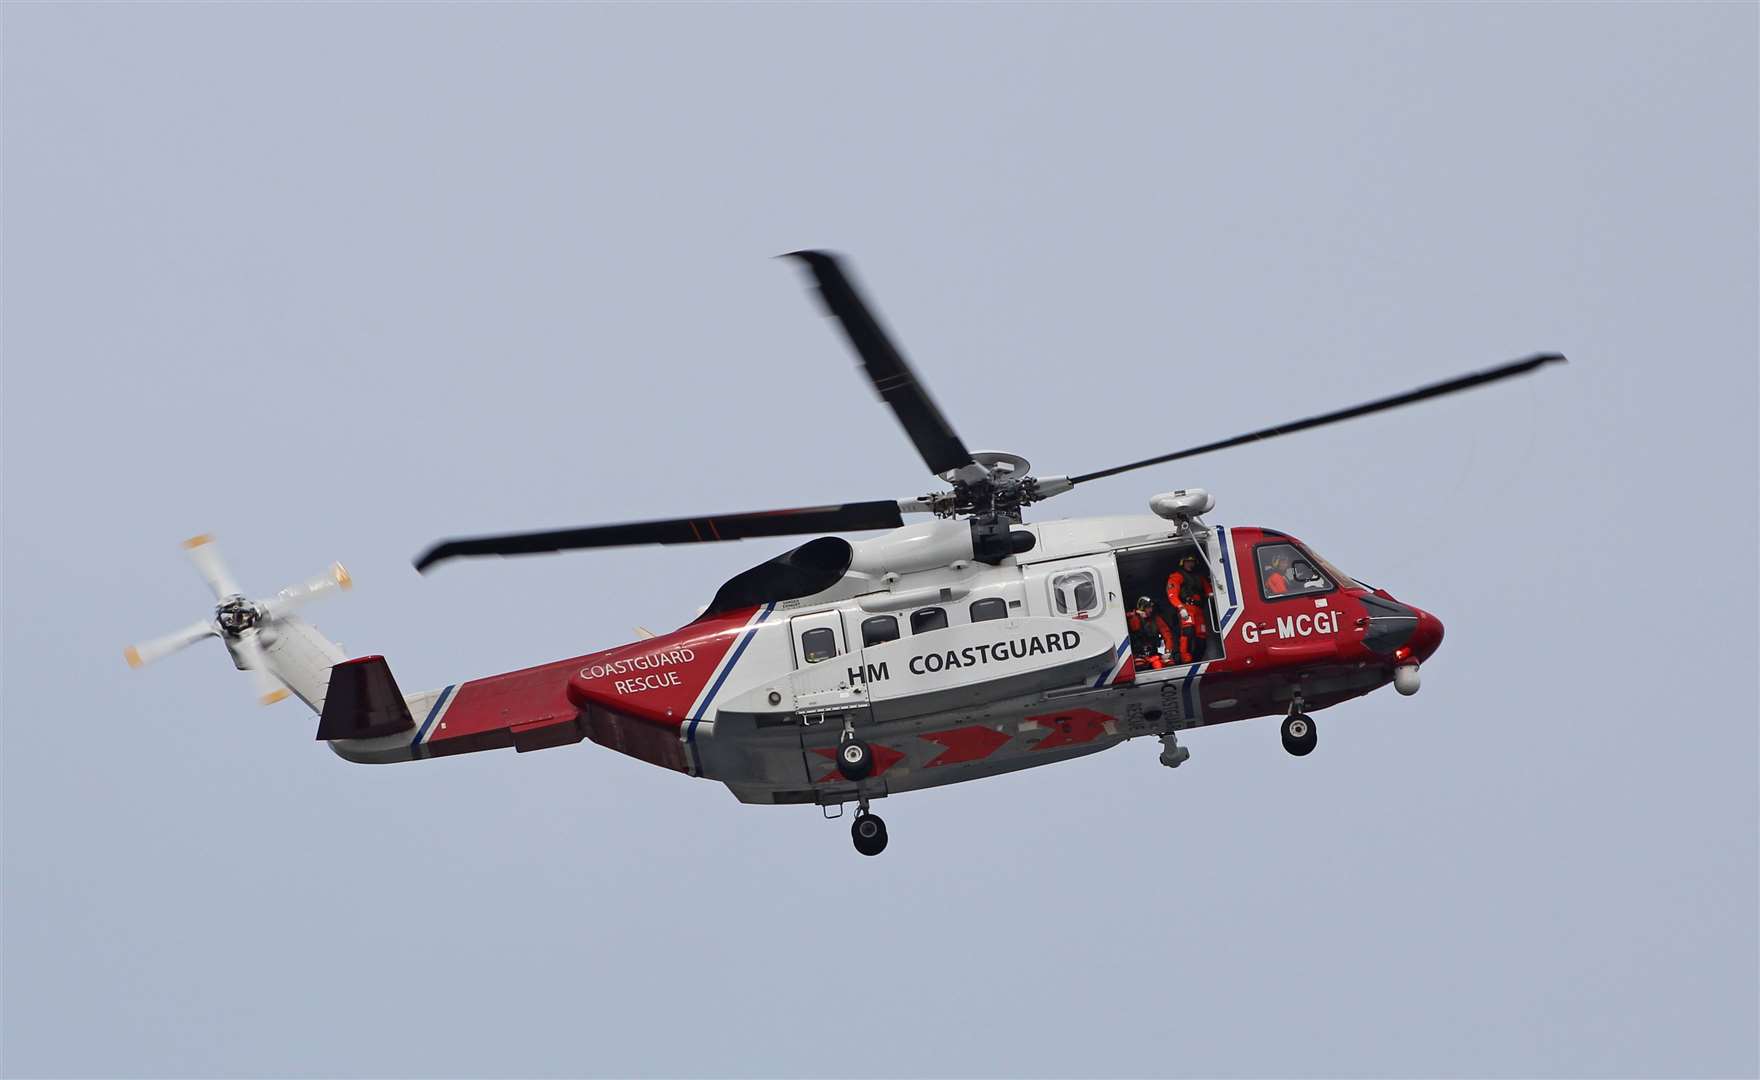 The injured woman was taken to hospital by the Inverness-based coastguard search and rescue helicopter.